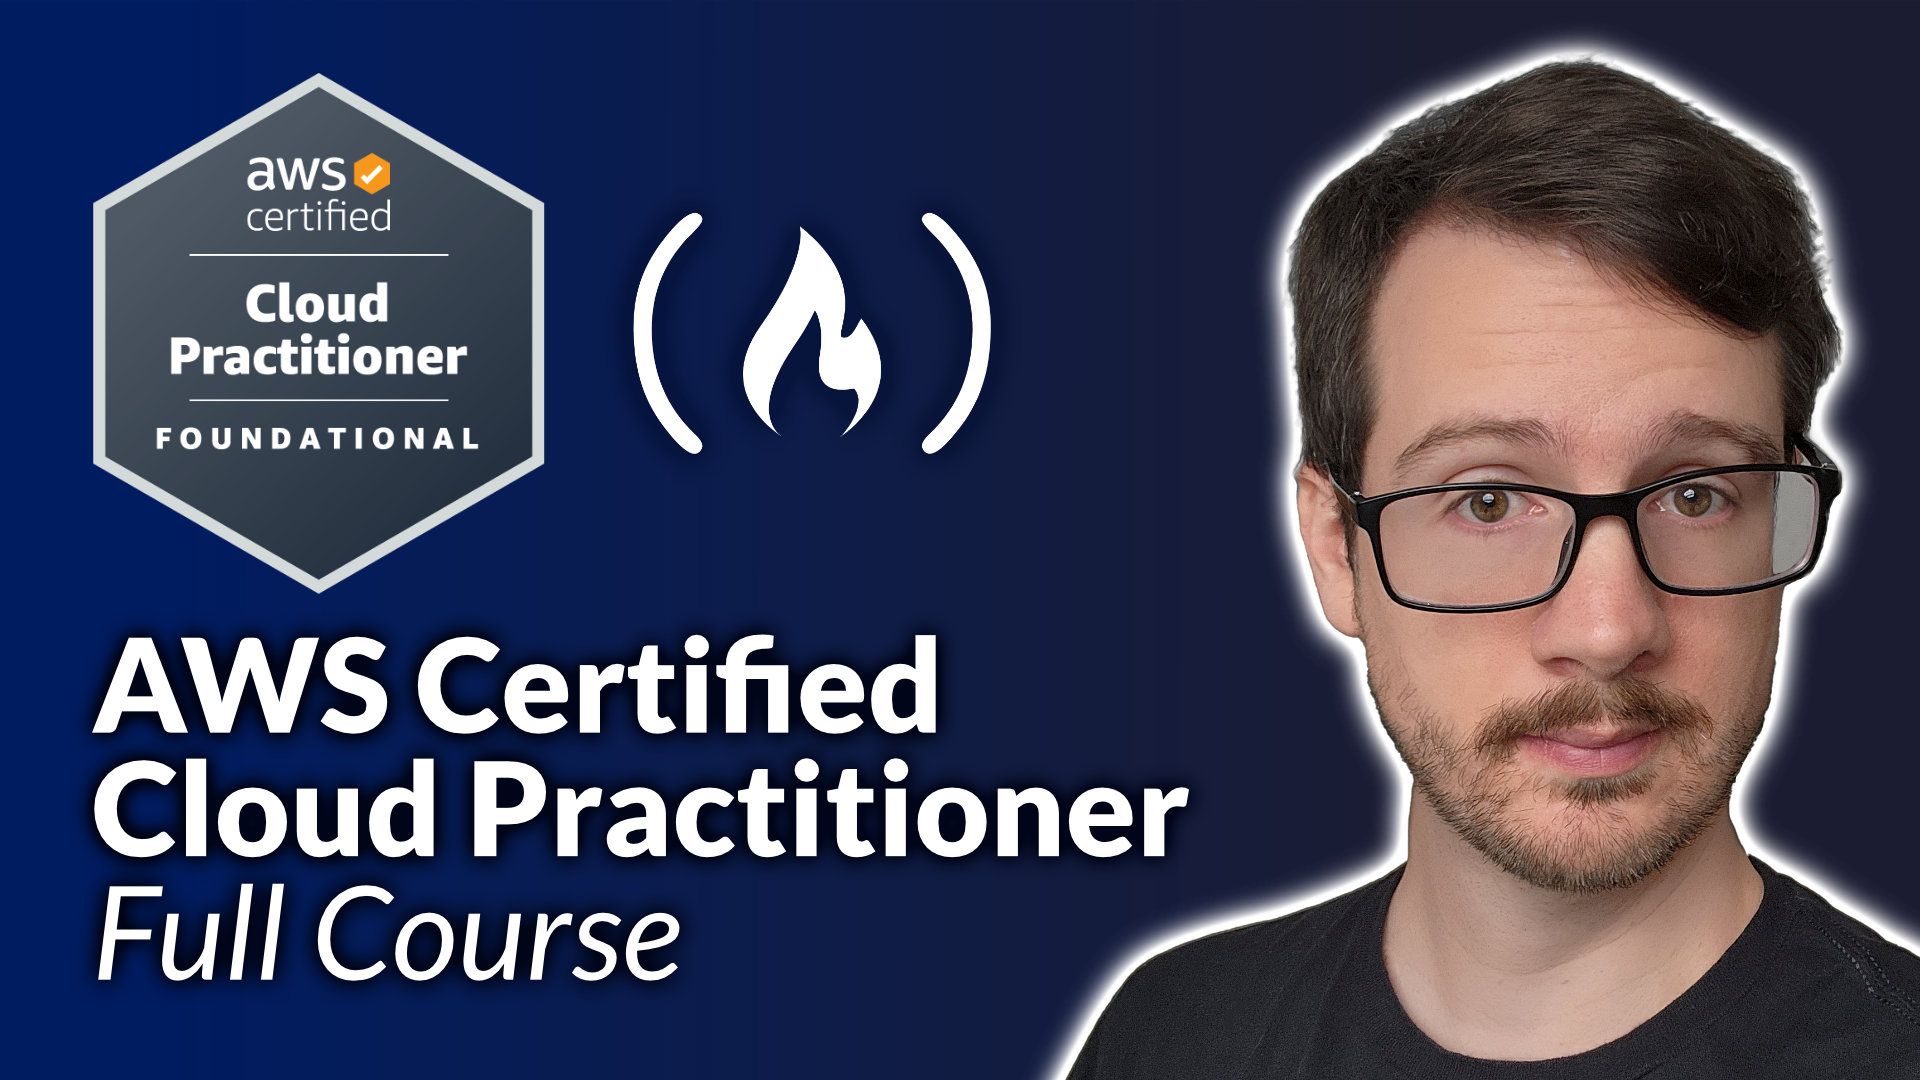 AWS Certified Cloud Practitioner Study Course – Pass the Exam With This Free 14-Hour Course